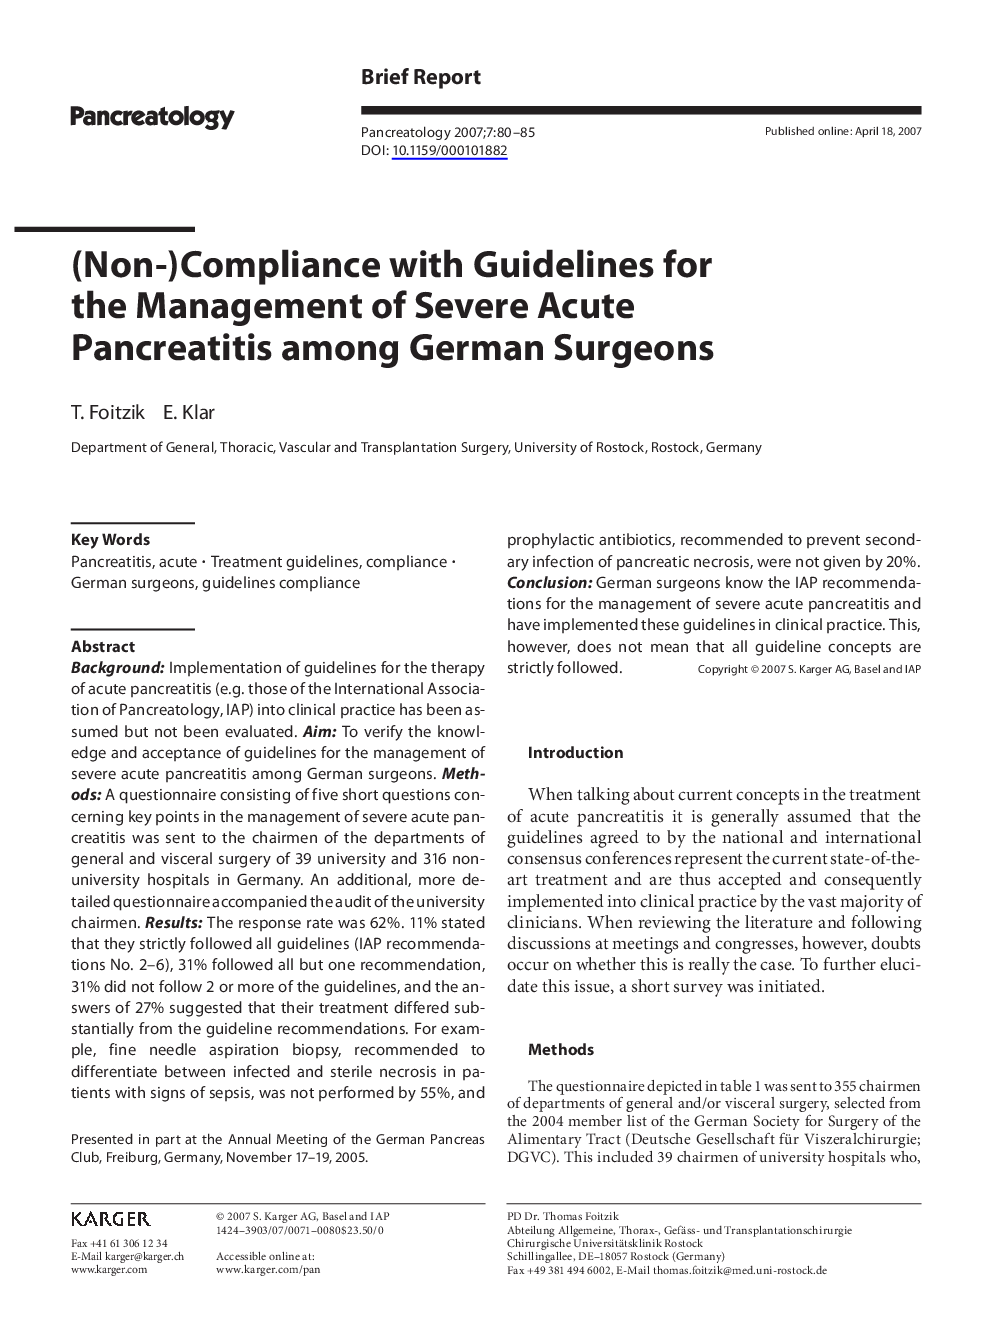 (Non-)Compliance with Guidelines for the Management of Severe Acute Pancreatitis among German Surgeons